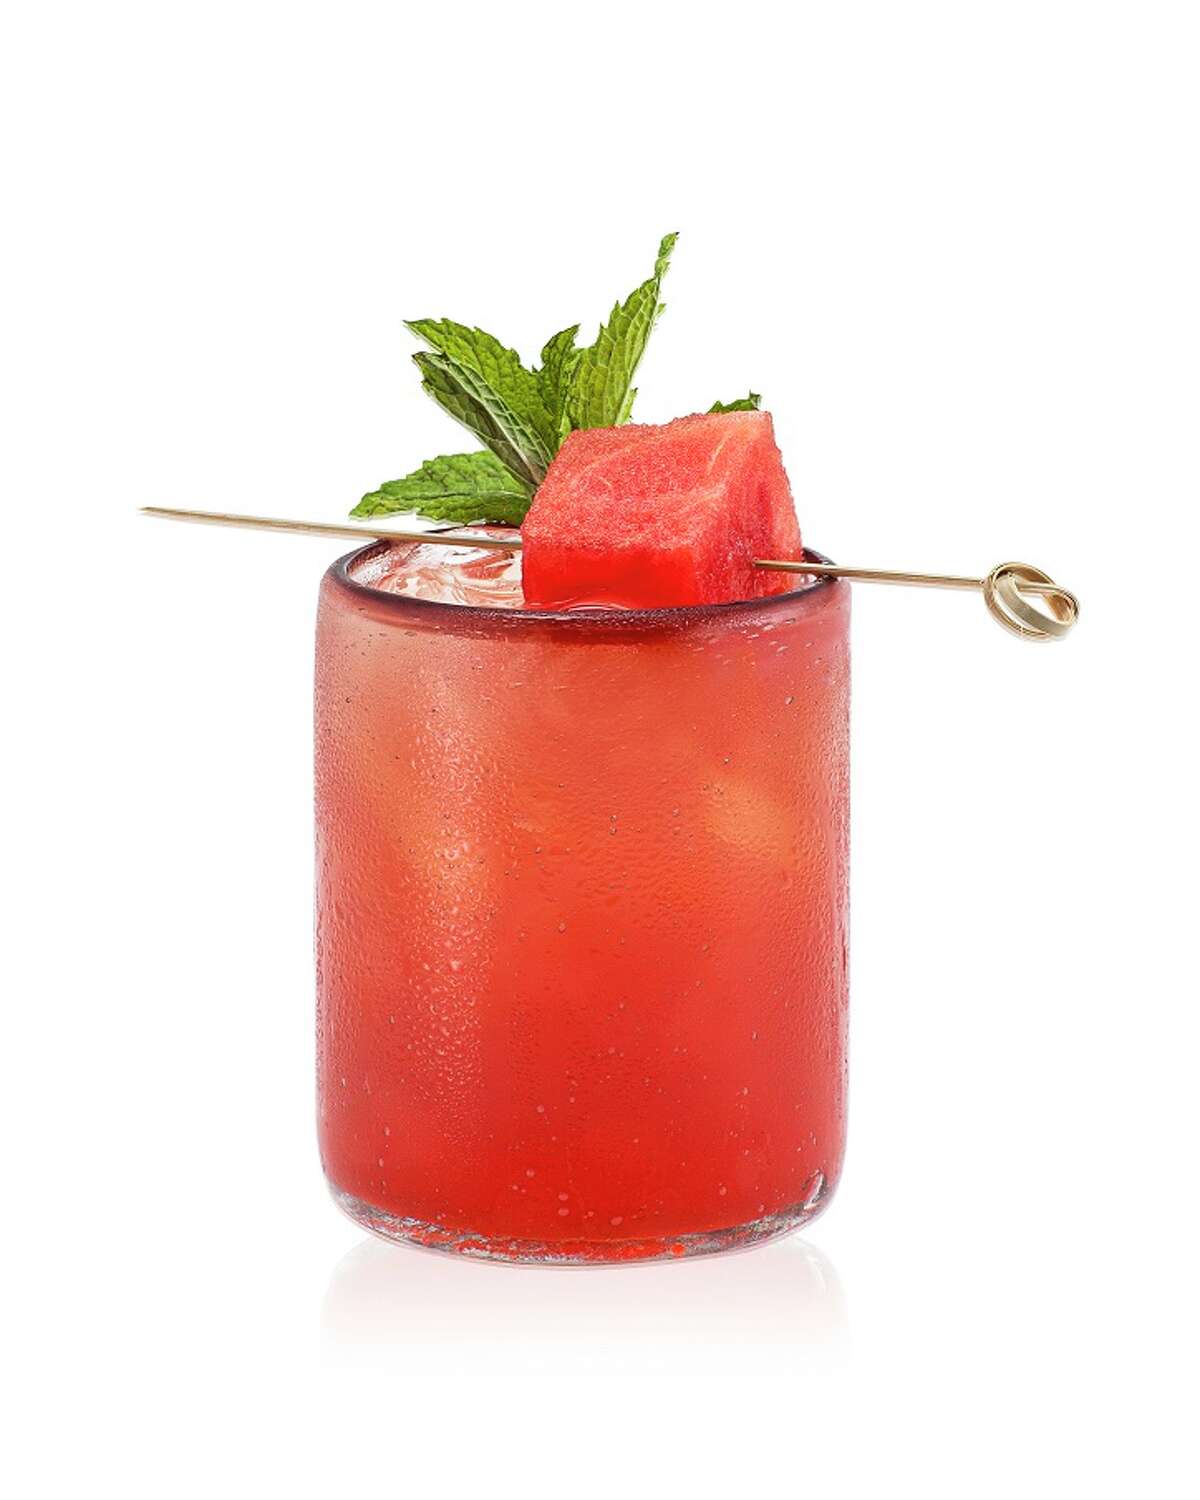 Casa Watermelon Mint Margarita is a cocktail made with Casamigos Blanco tequila, watermelon and mint. For National Tequila Day, July 24.